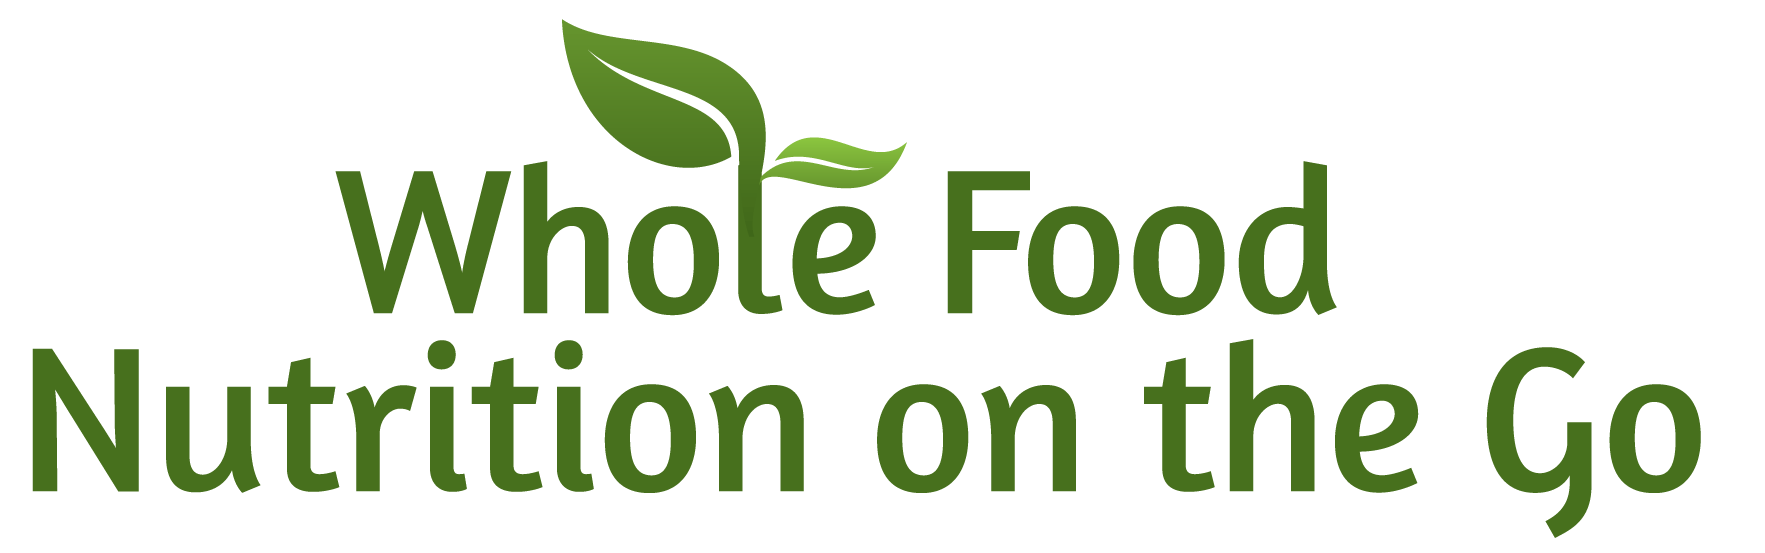 Whole Food Nutrition On the Go